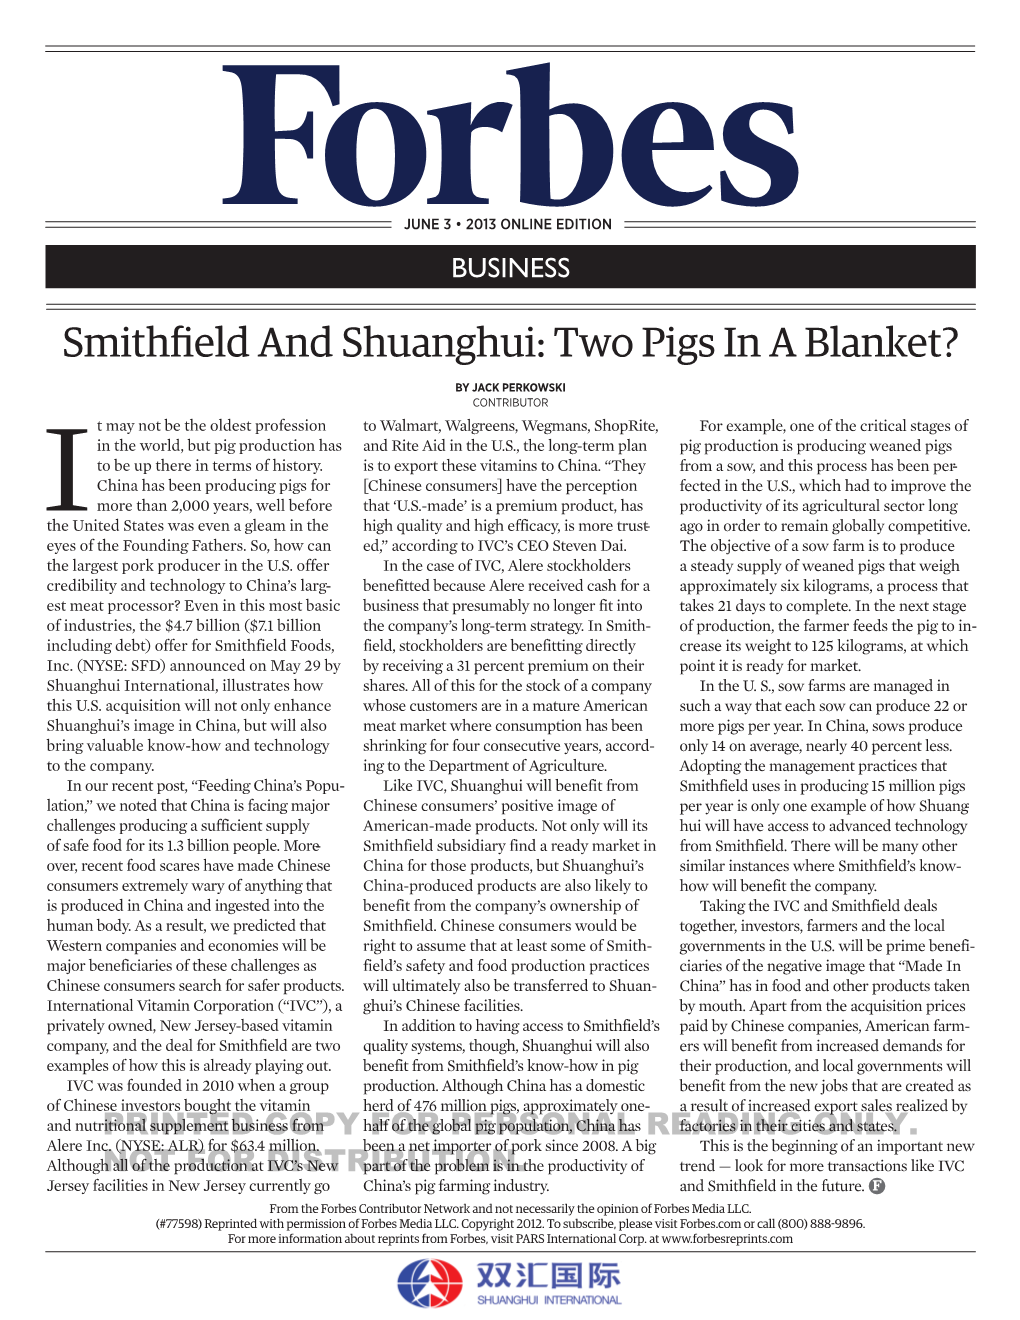 Smithfield and Shuanghui: Two Pigs in a Blanket?